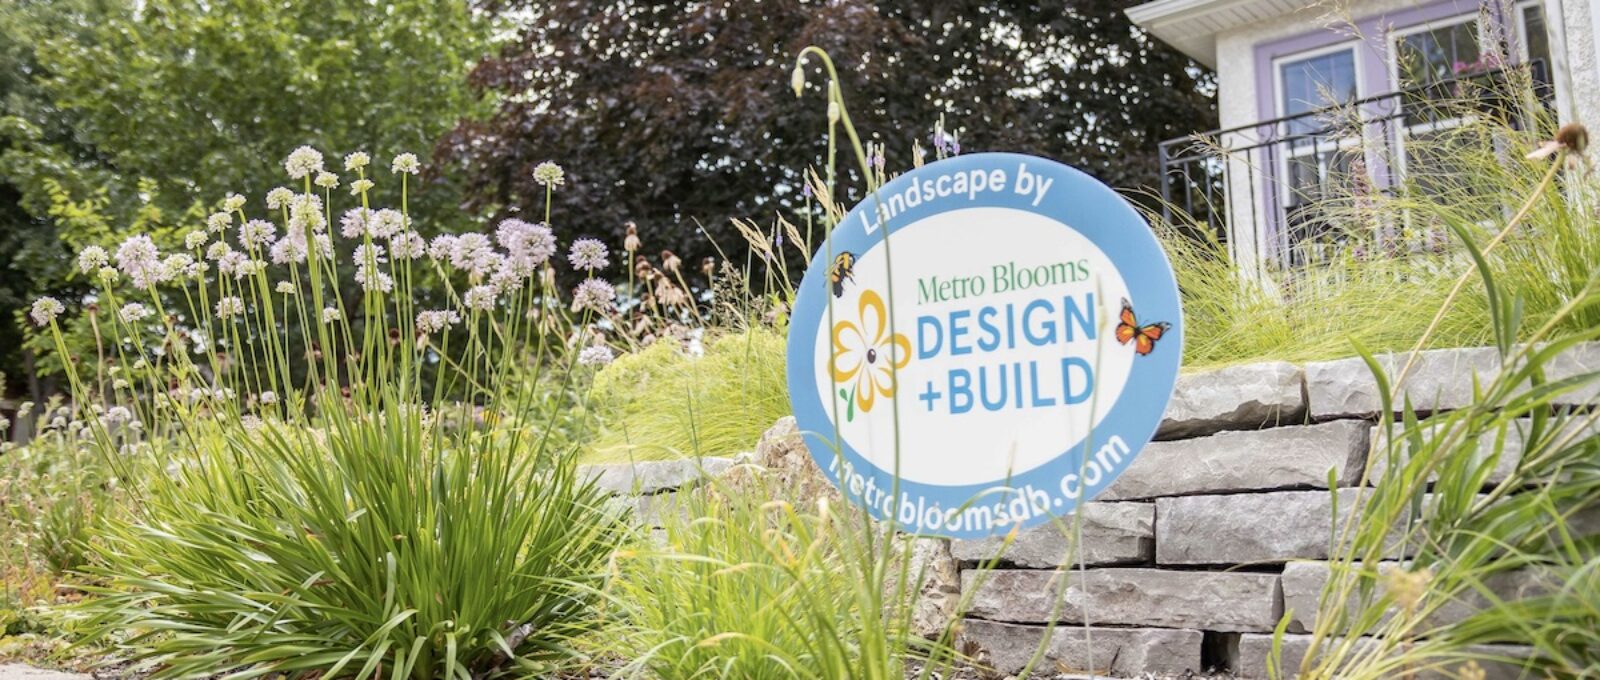 Metro Blooms Design and Build sign in yard with flowers